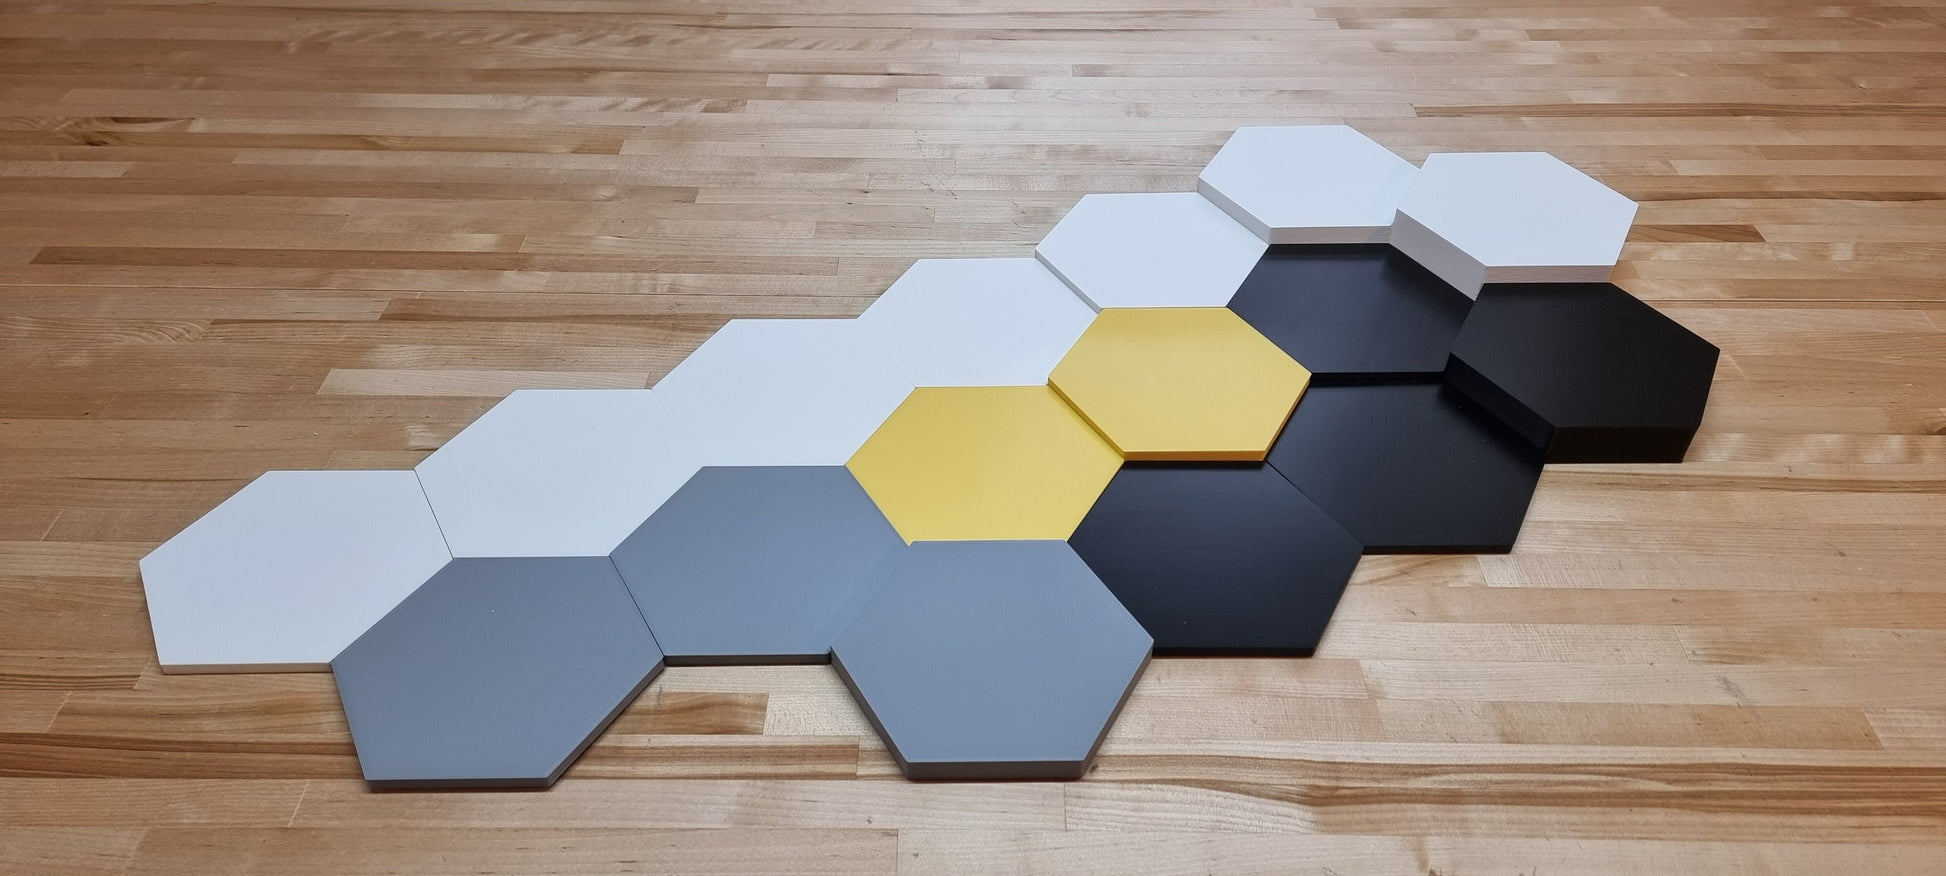 3D Hexagon Wall Tiles In Tons of Sizes & Colors! 5in Wide. Get A Modern Honeycomb Look With 3D Hexagon Wall Tiles